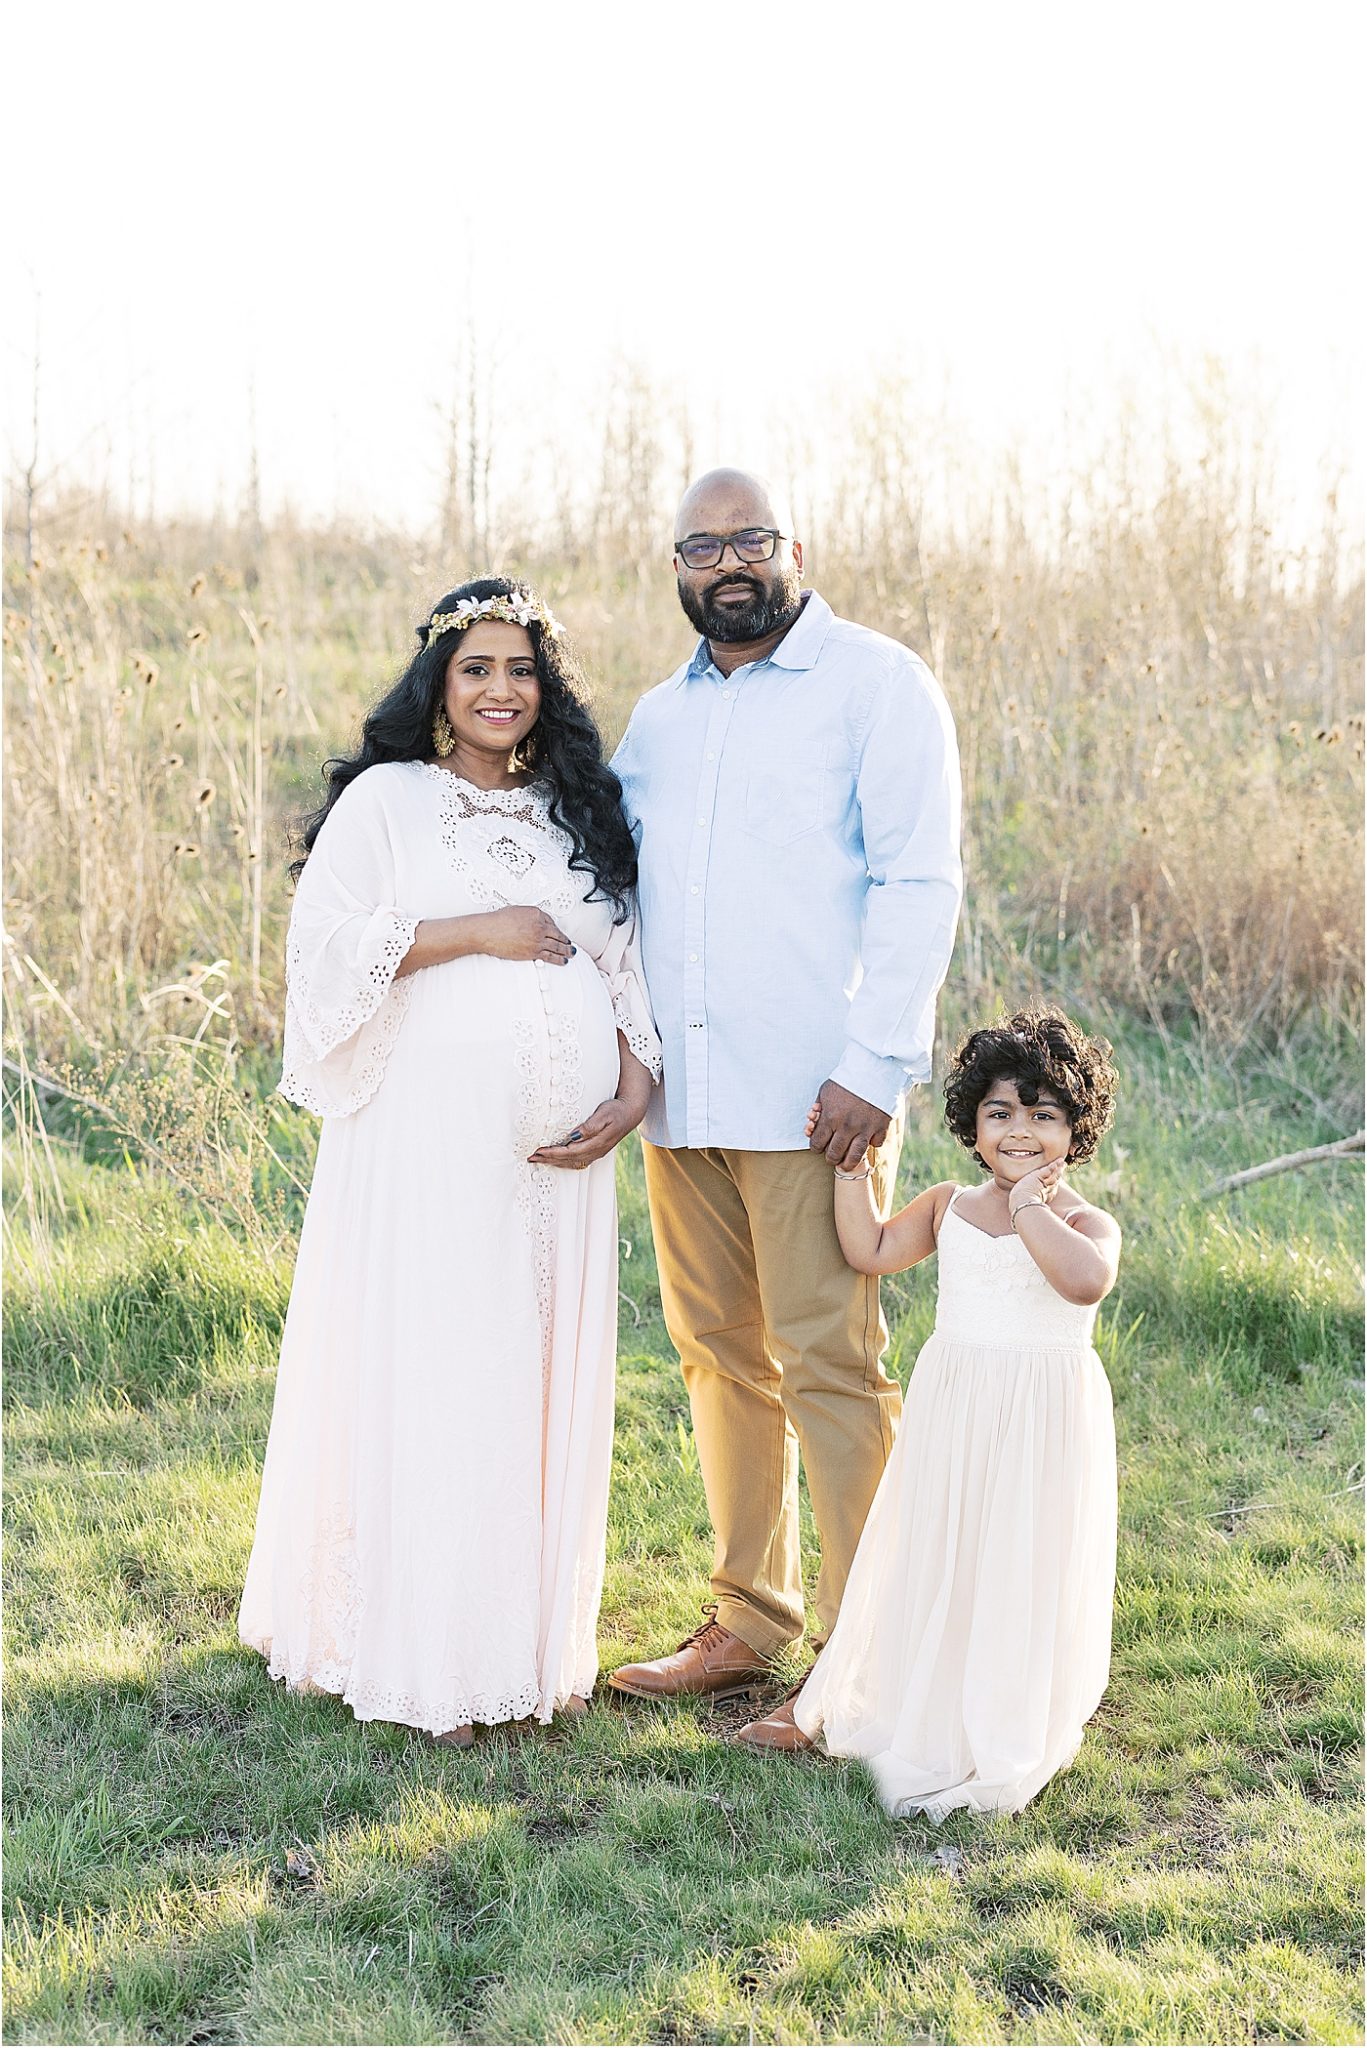 Outdoor maternity session with Natural light Indy Photographer, Lindsay Konopa Photography.